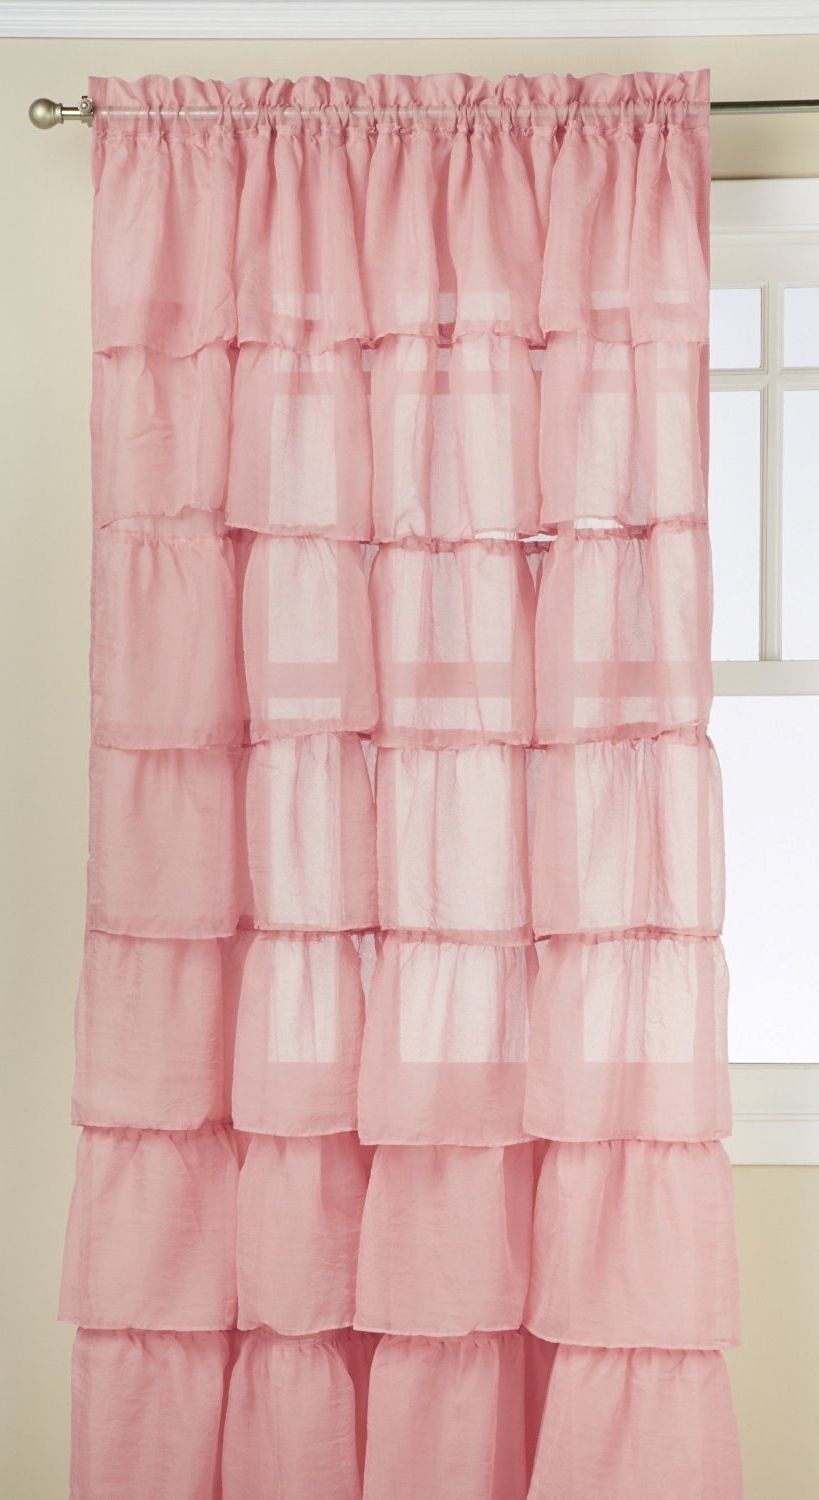 Buy Green 84" Long Gypsy Shabby Chic Ruffled Fabric Shower Pertaining To 2021 Elegant Crushed Voile Ruffle Window Curtain Pieces (View 15 of 20)